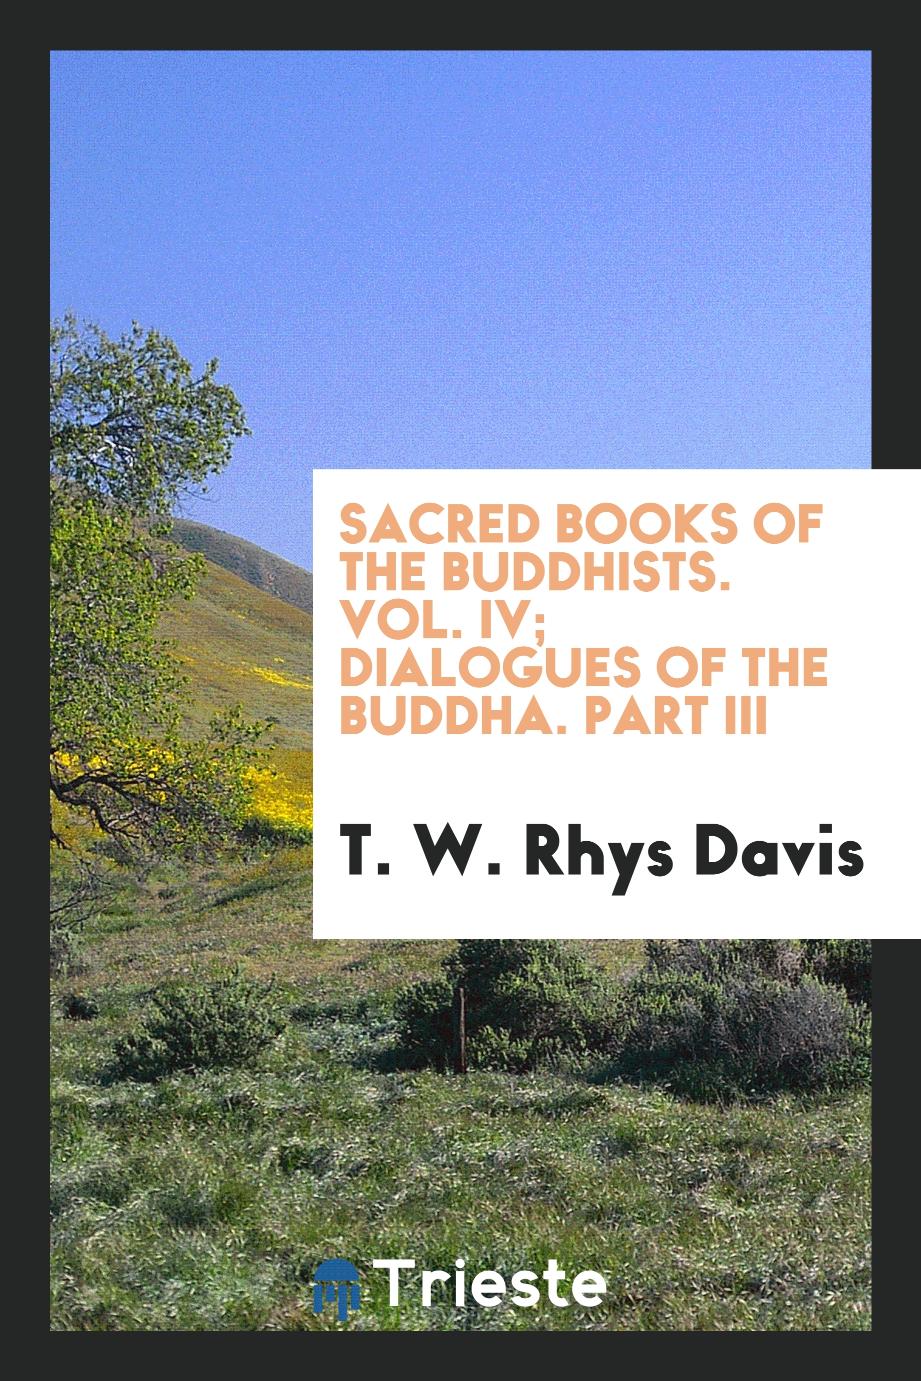 Sacred books of the Buddhists. Vol. IV; Dialogues of the Buddha. Part III